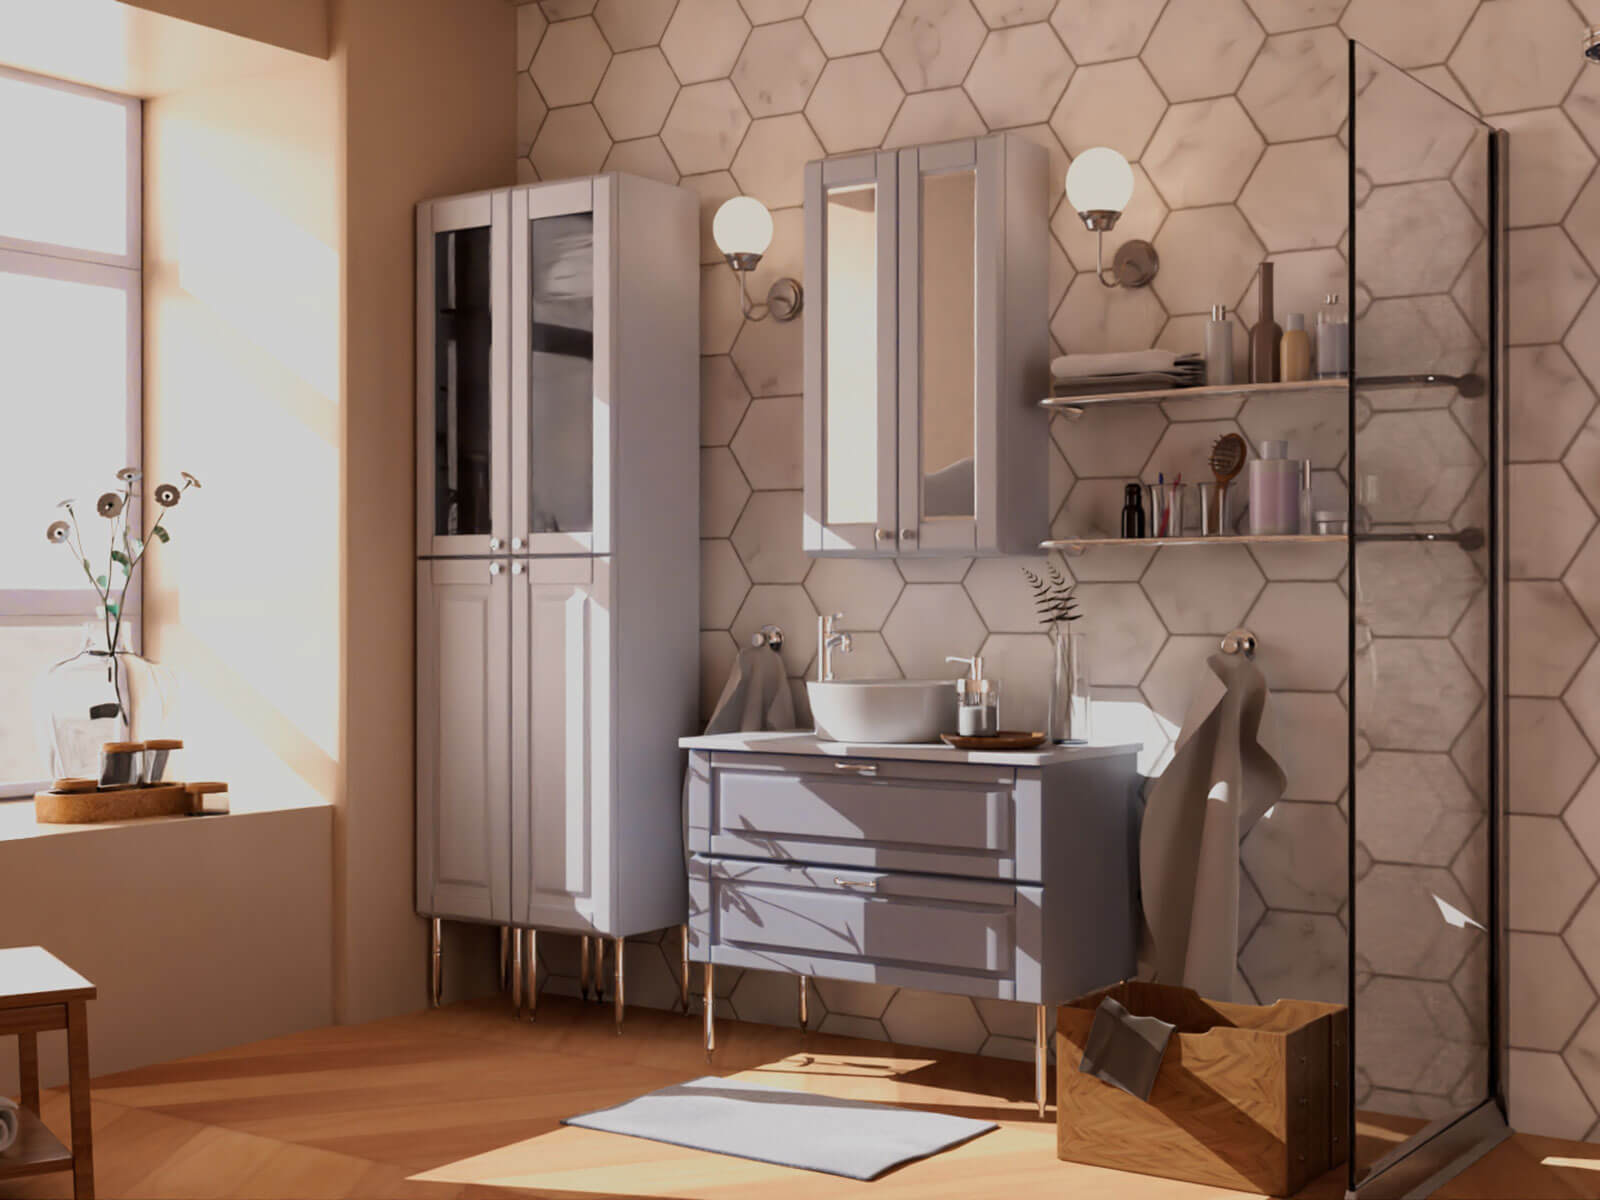 A look at a bathroom with a large window on the left and a shower on the right